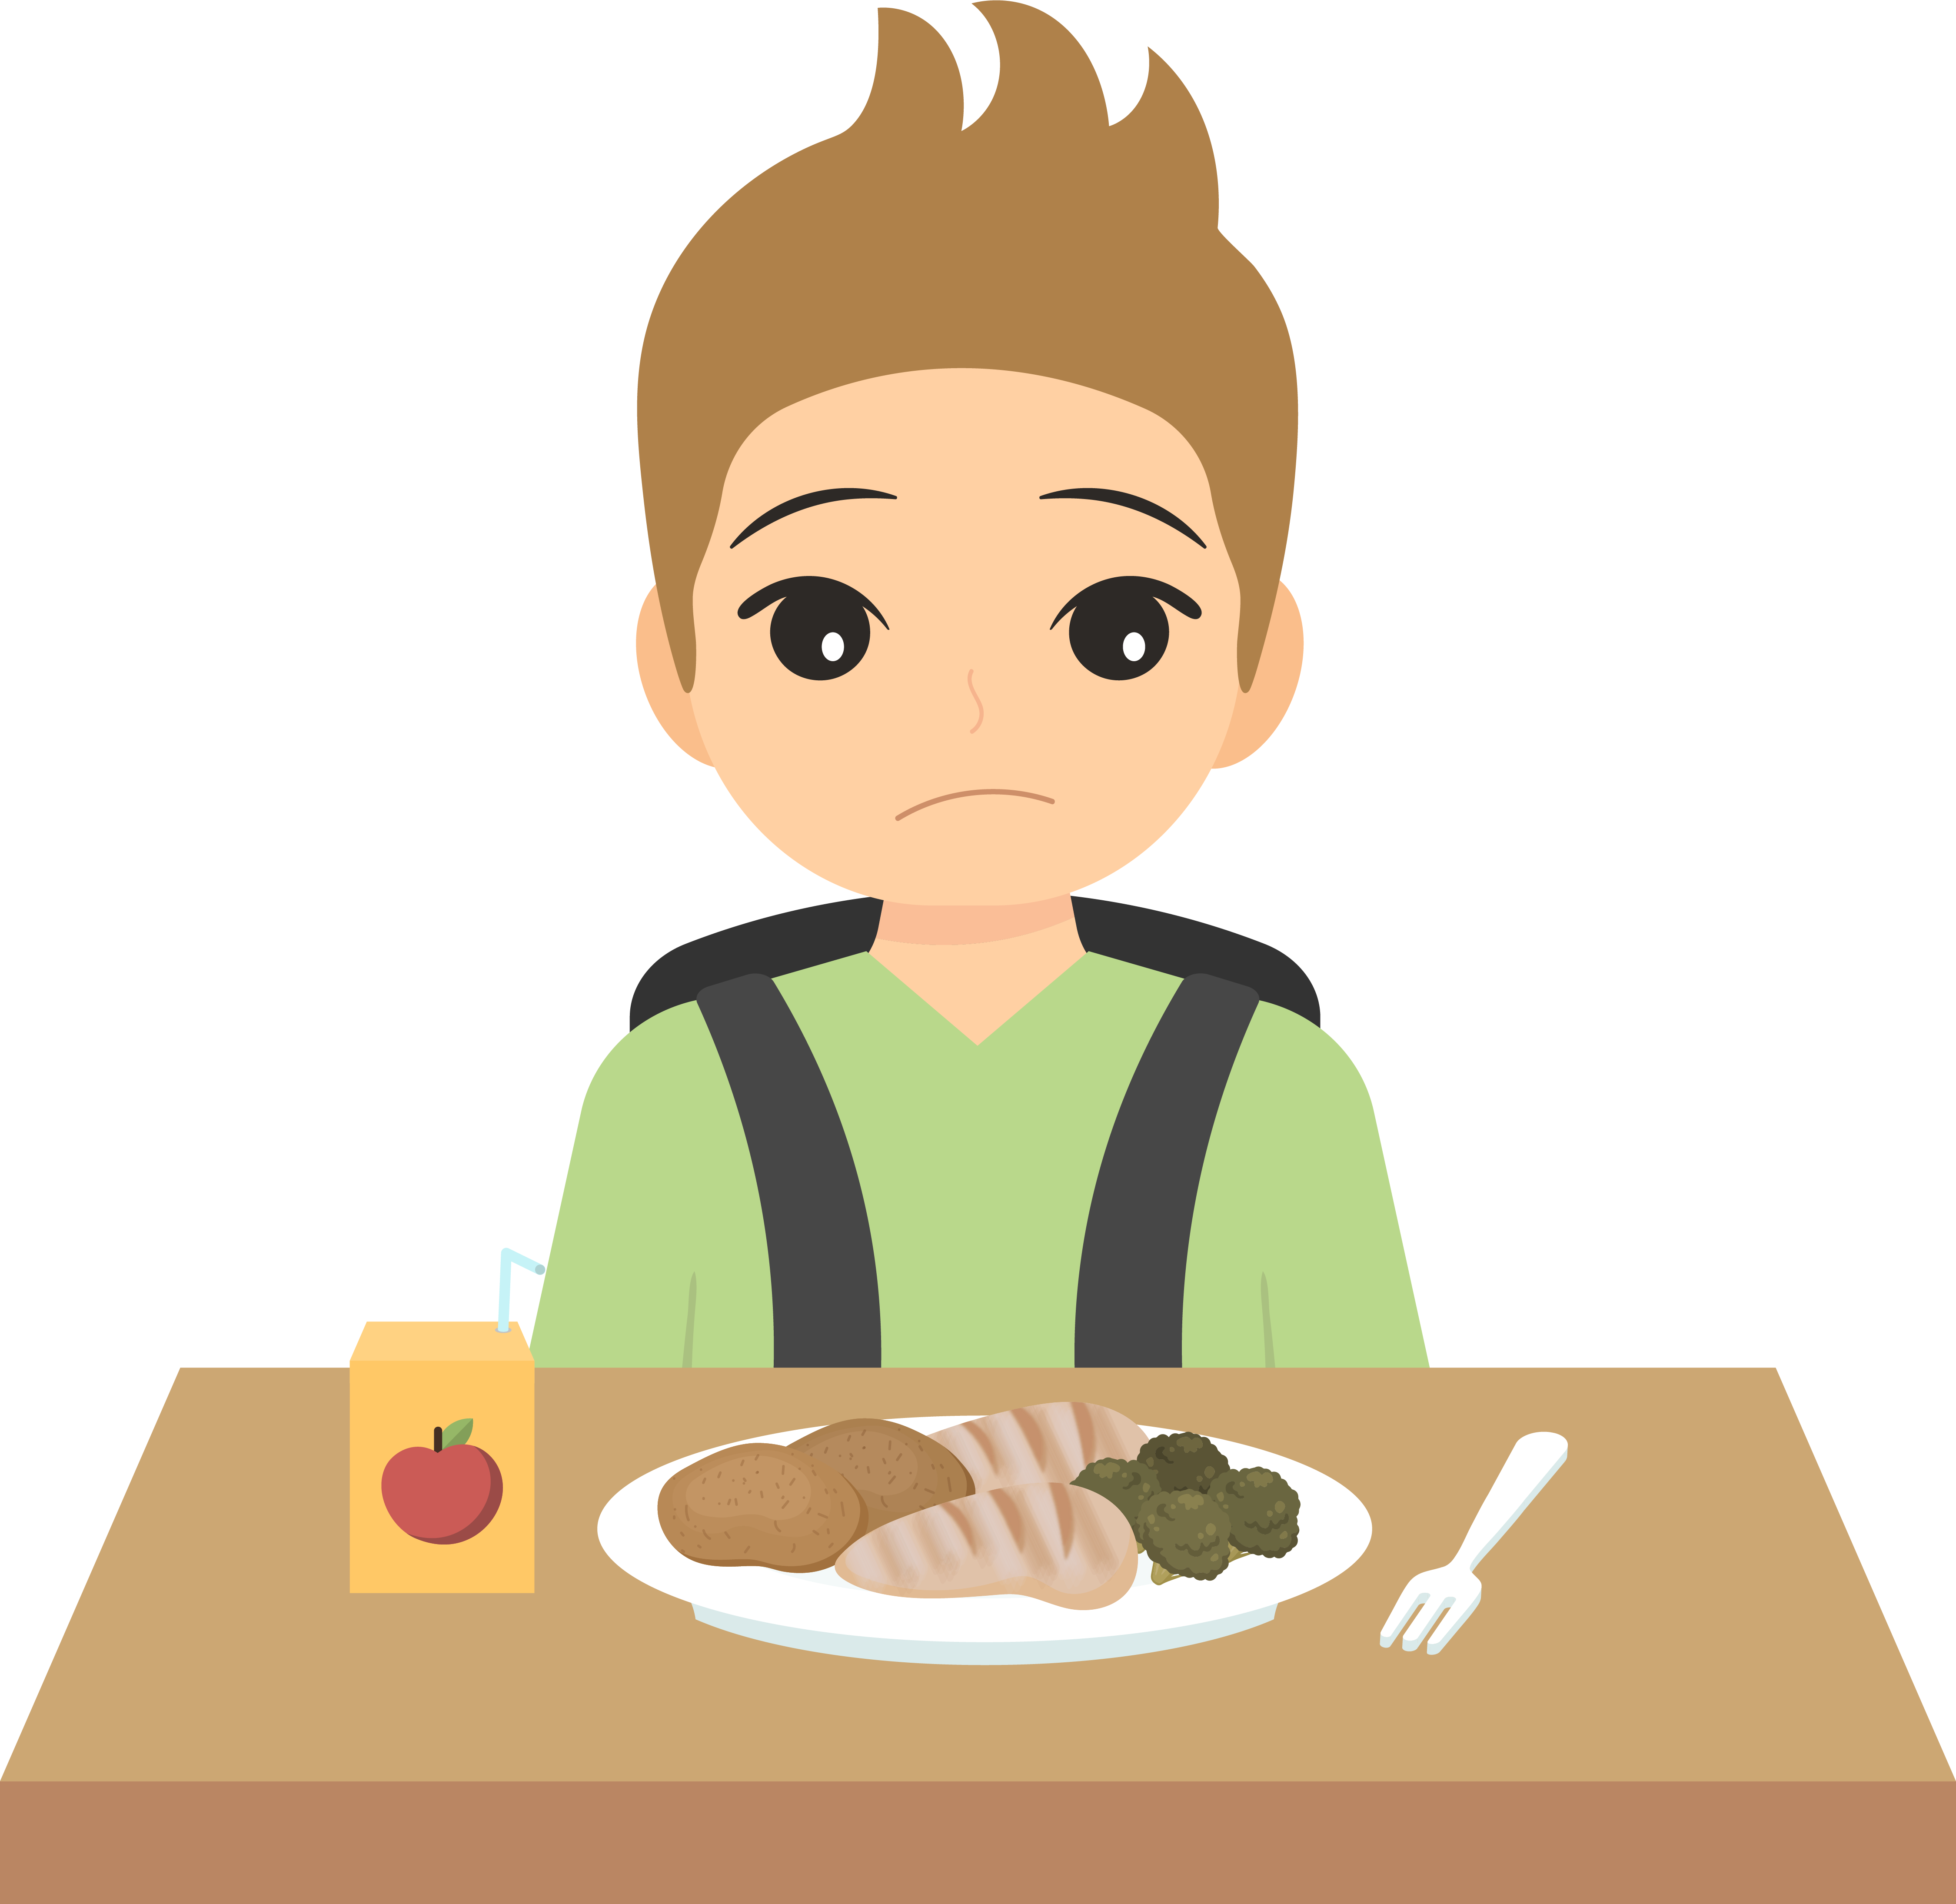 A student is looking dejectedly at a plate of food. The food looks like it has the flavour profile of cardboard. The plate is flanked by a box of apple juice and a fork. The student is wearing a backpack.